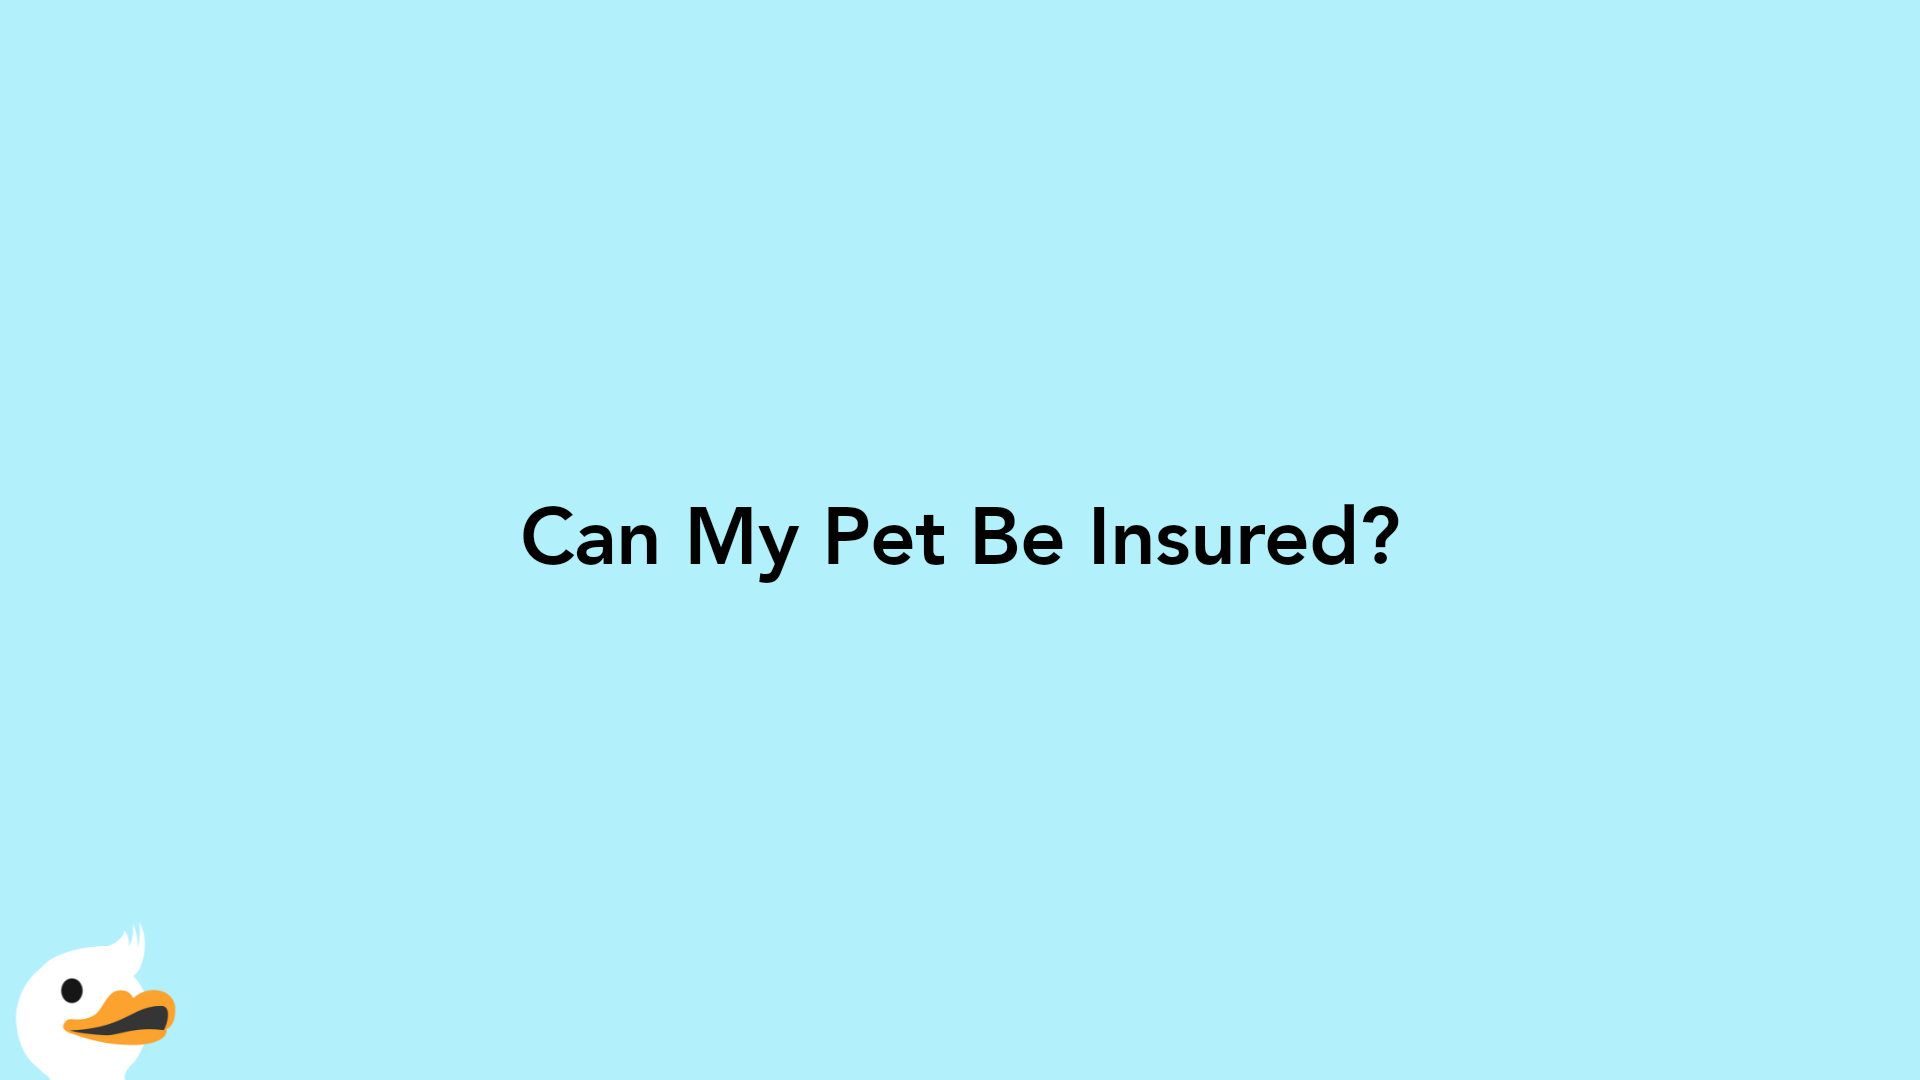 Can My Pet Be Insured?